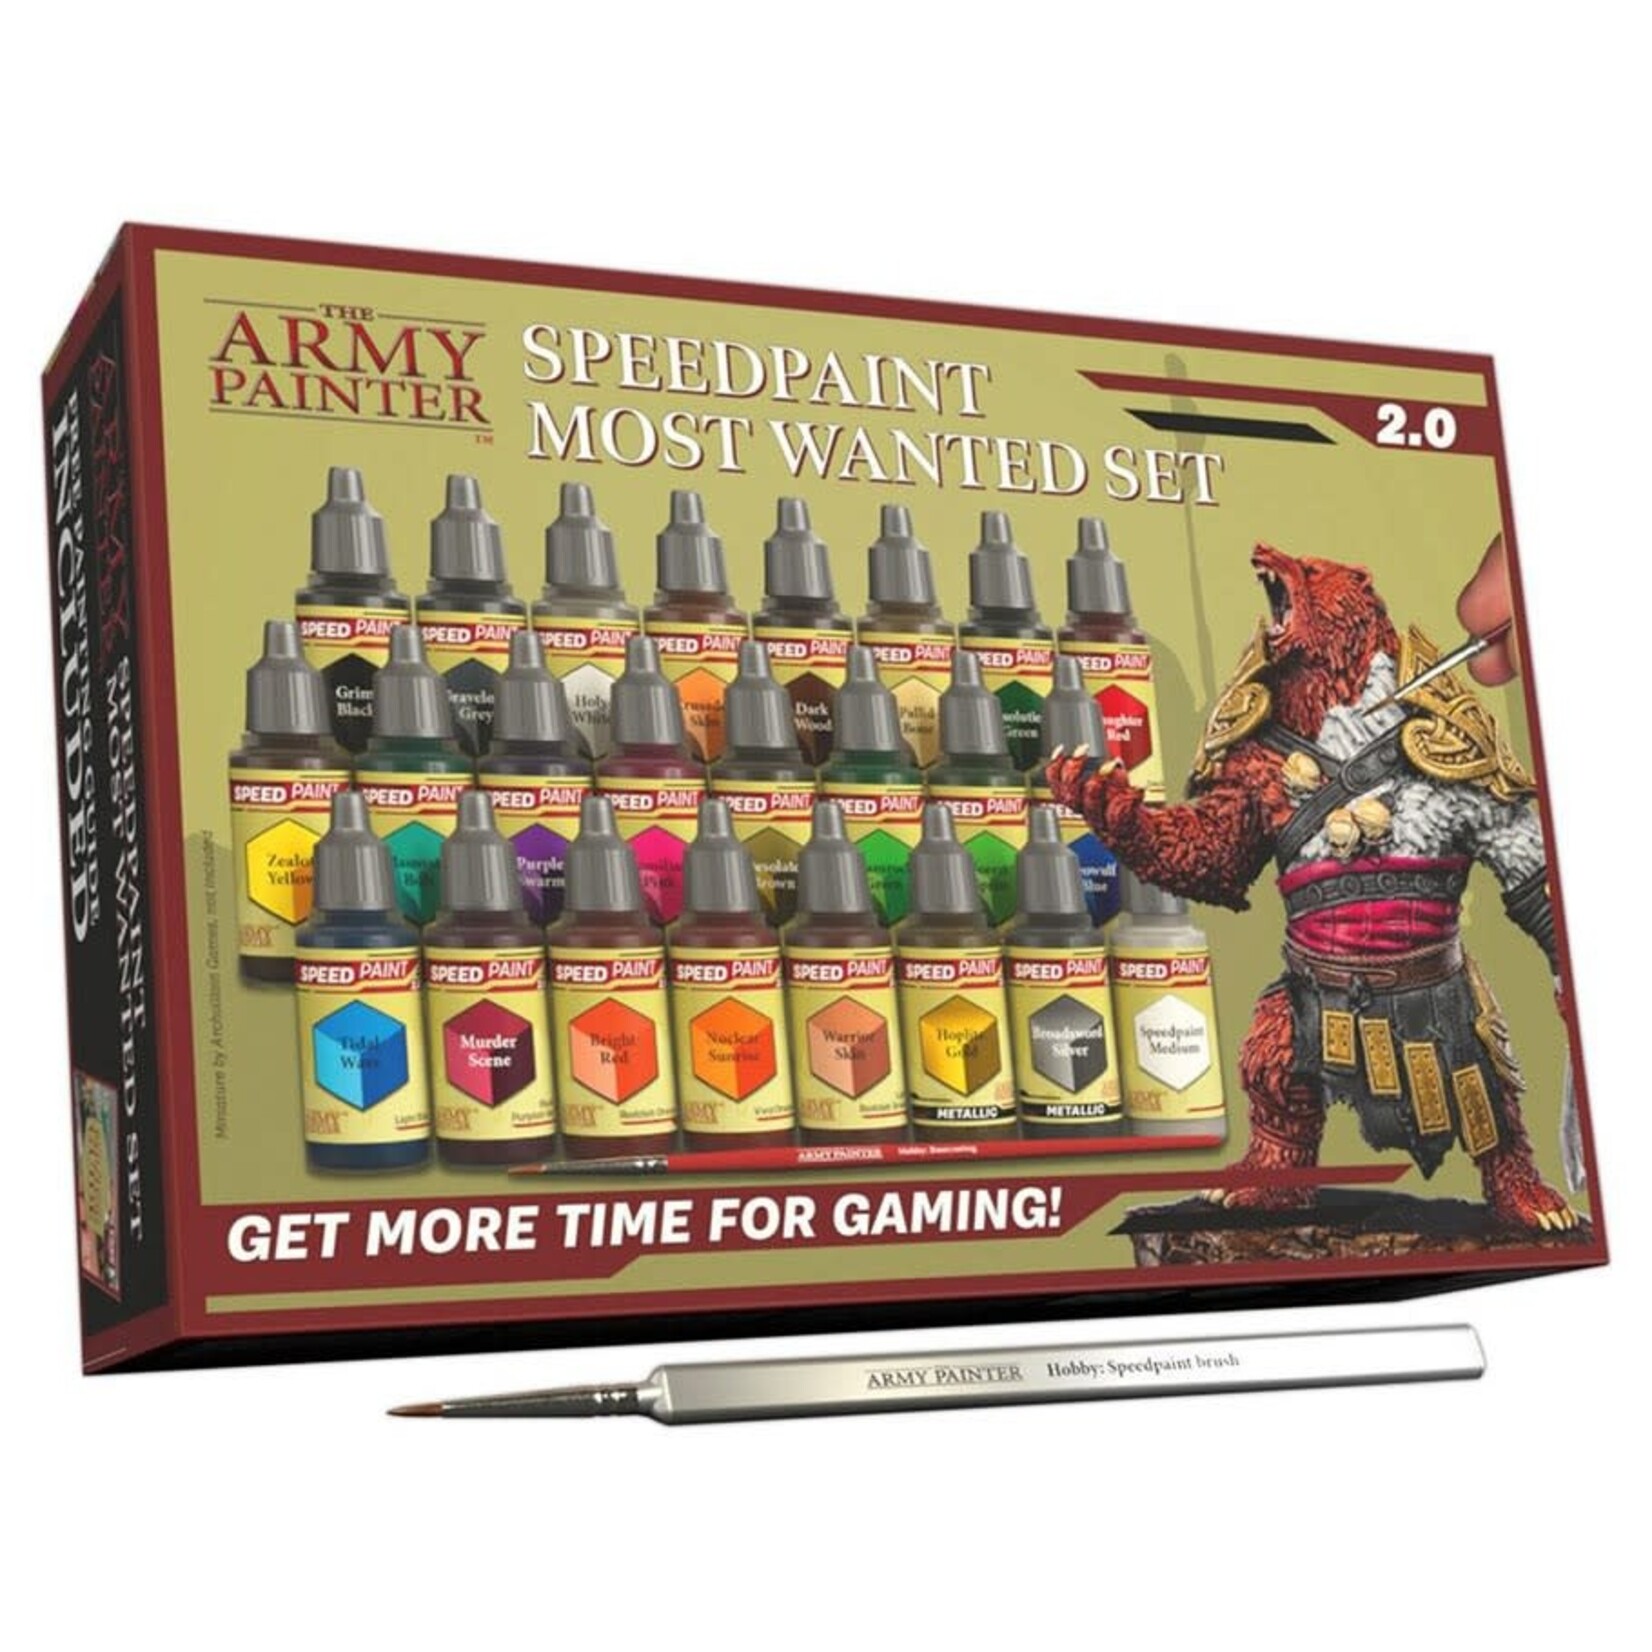 The Army Painter The Army Painter Speedpaint Most Wanted 2.0 (25 set)